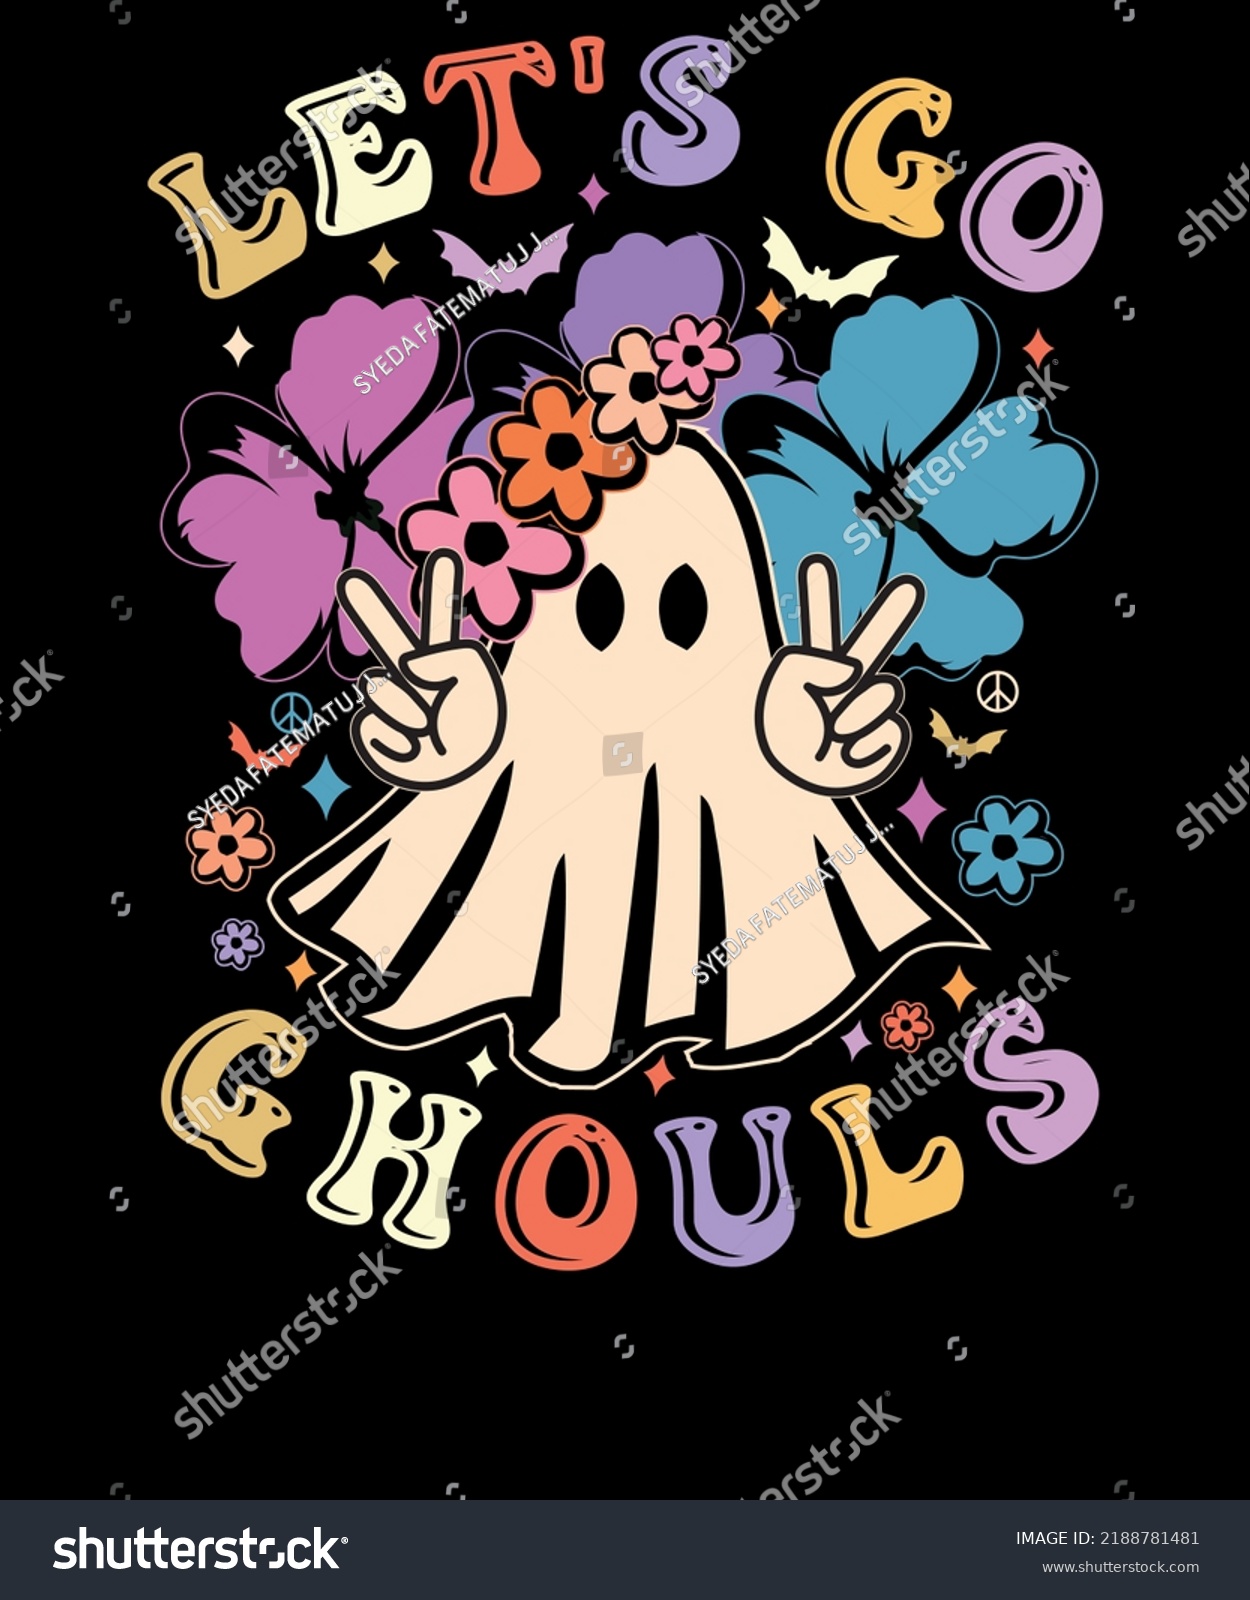 SVG of Let's go ghouls Halloween boo Retro t shirt Vintage Halloween Party t-shirt design svg